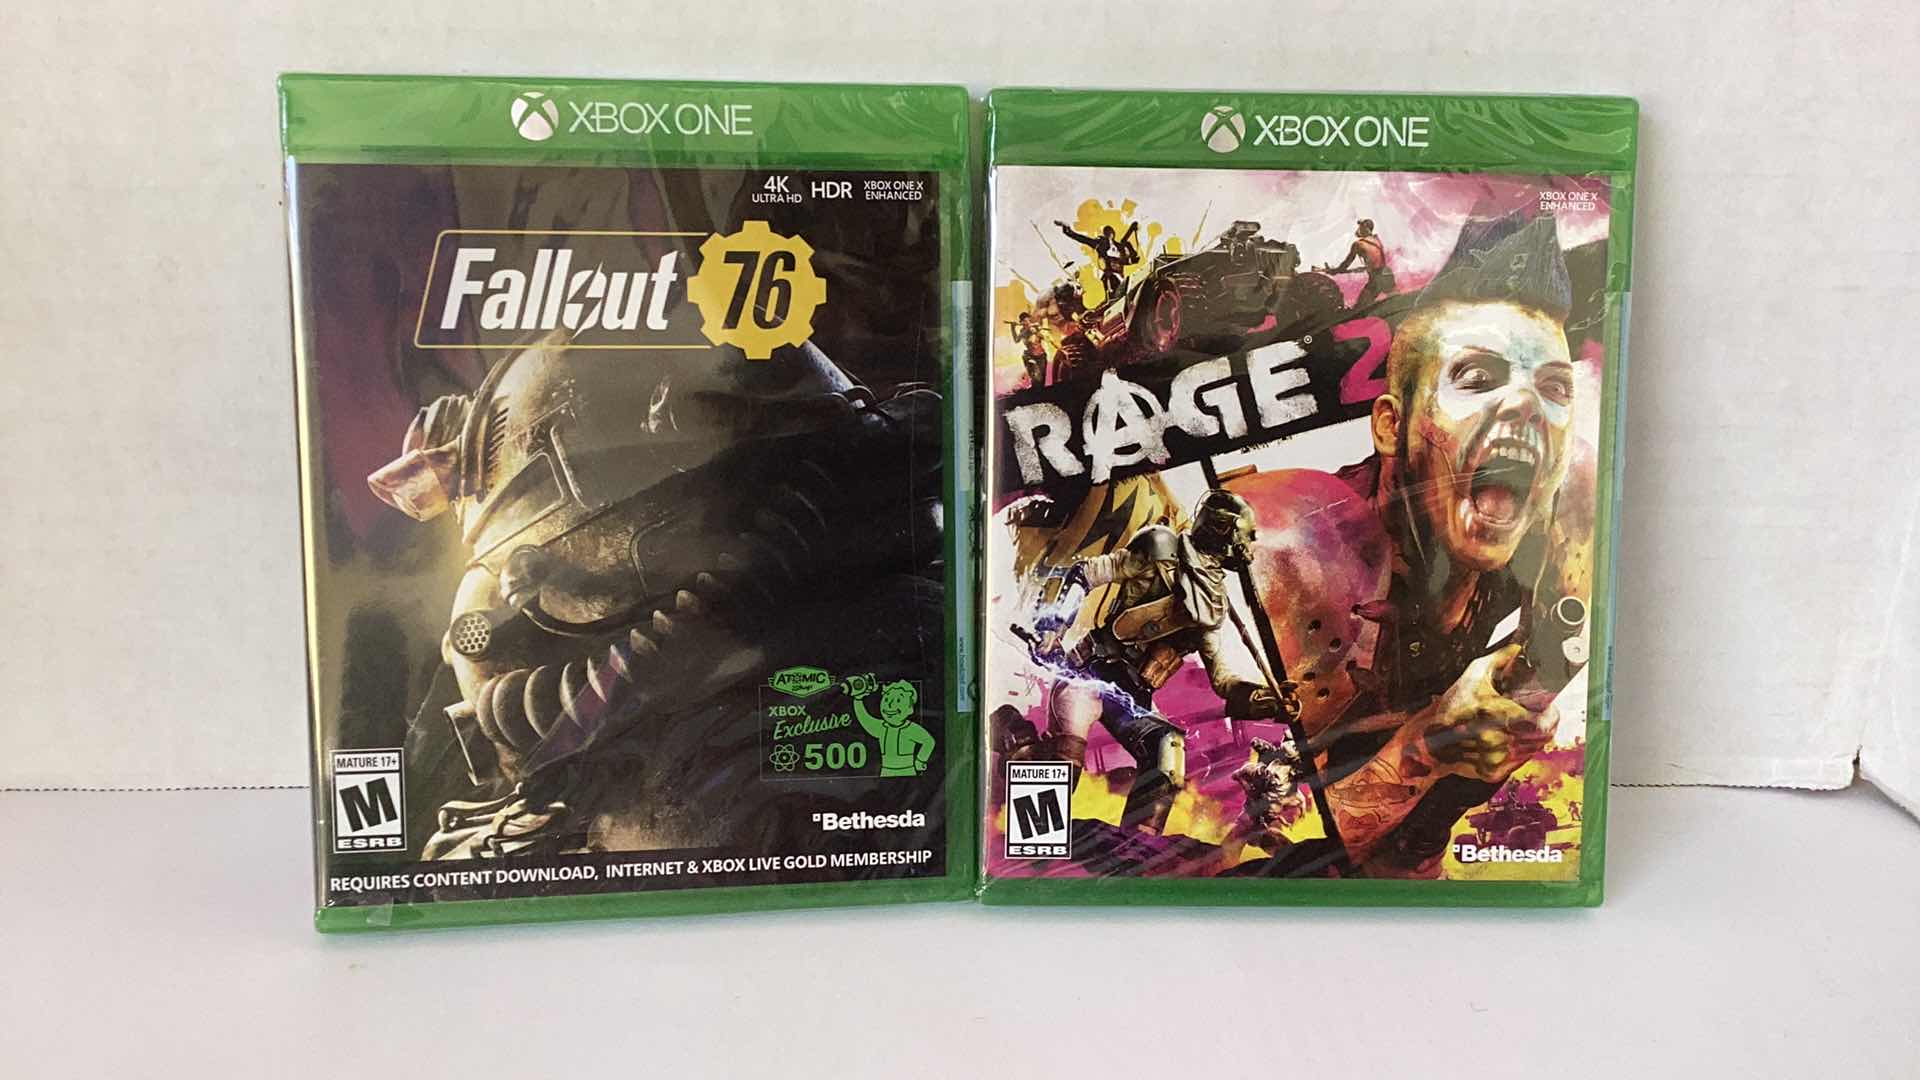 Photo 1 of 2 NEW X-BOX GAMES: FALLOUT 76 AND RAGE 2